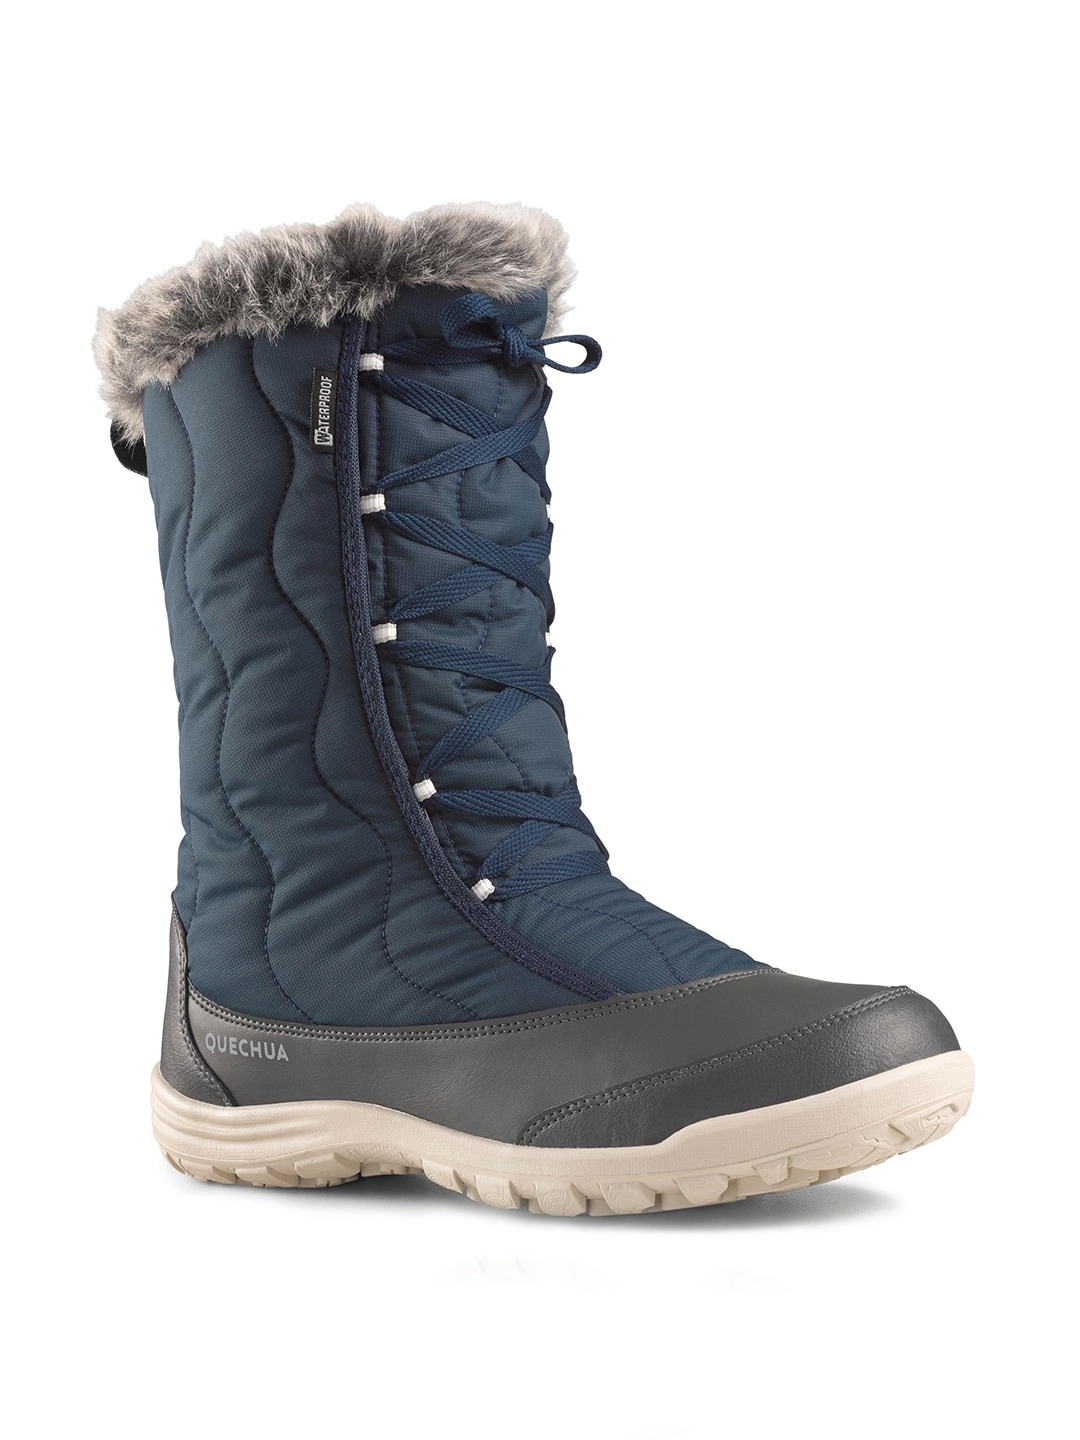 Quechua By Decathlon Women Blue Solid High Top Snow Boots Price in India